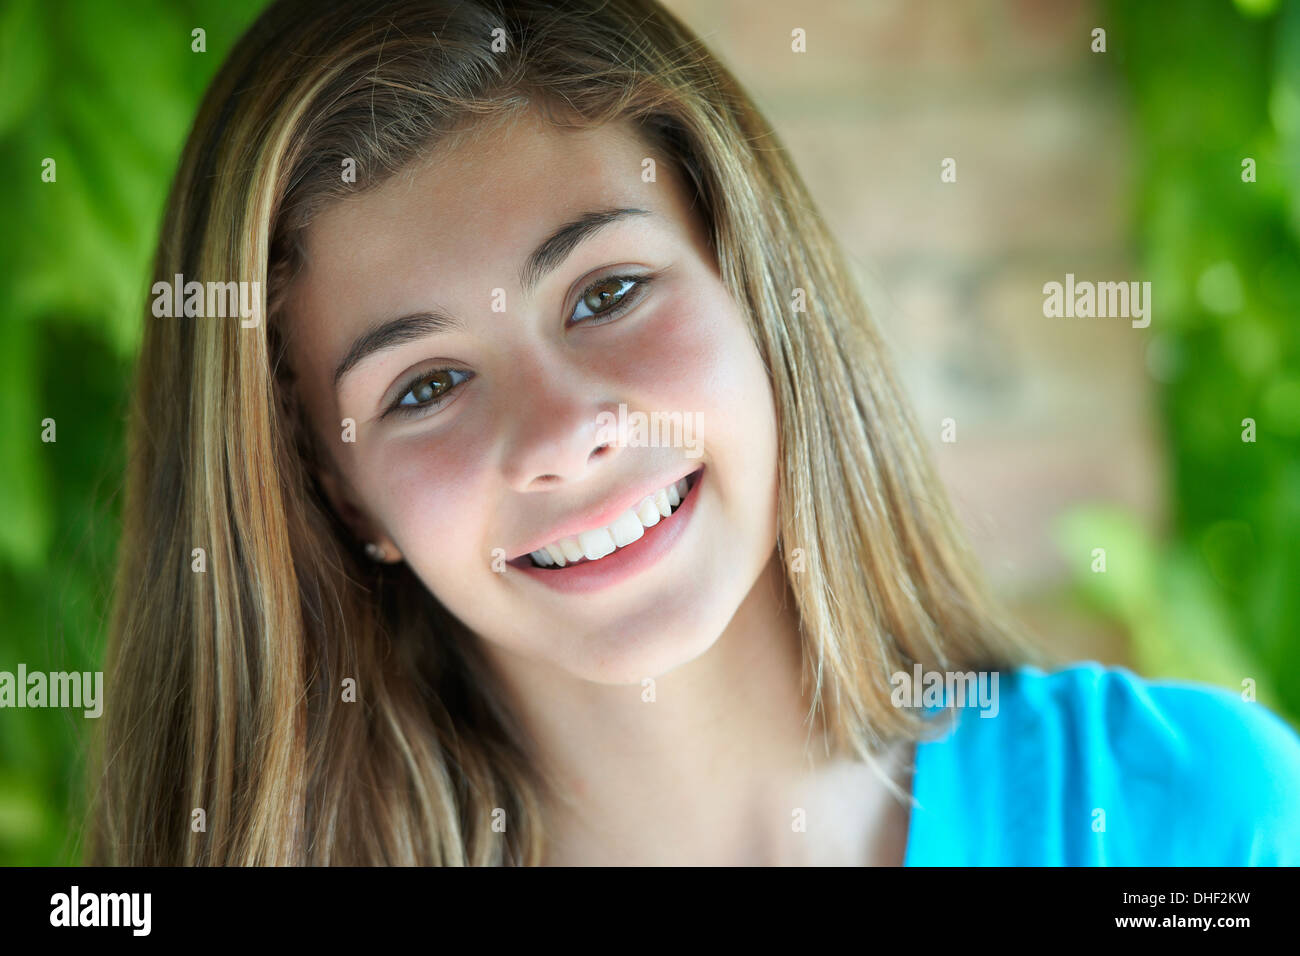 Portrait of teenage girl looking at camera, close up Stock Photo